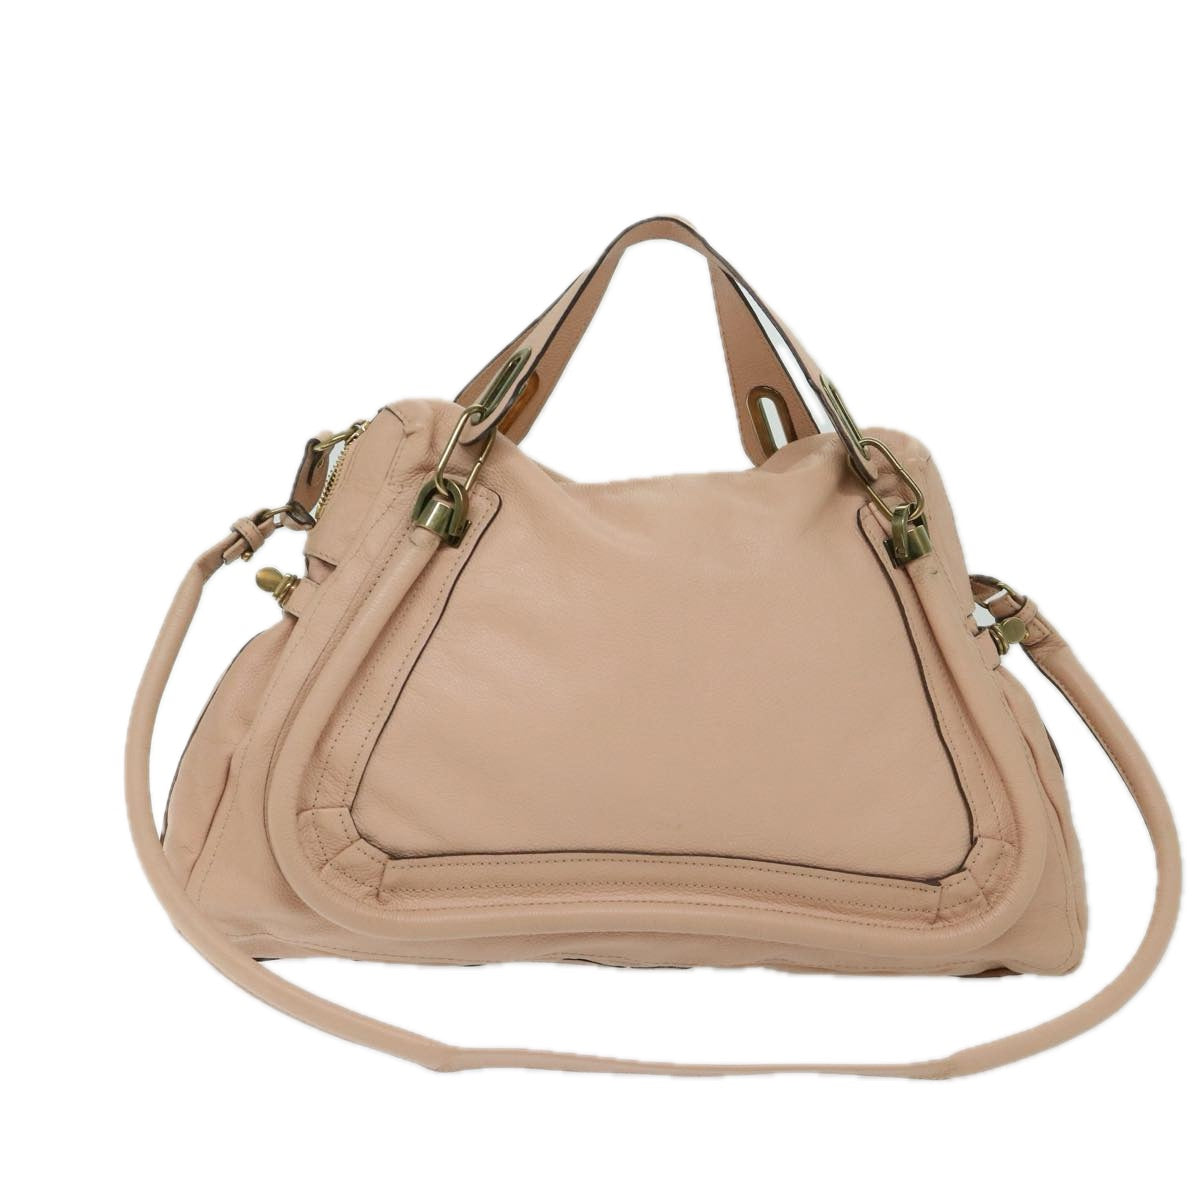 Chloe Paraty Hand Bag Leather 2way Pink Auth bs12541